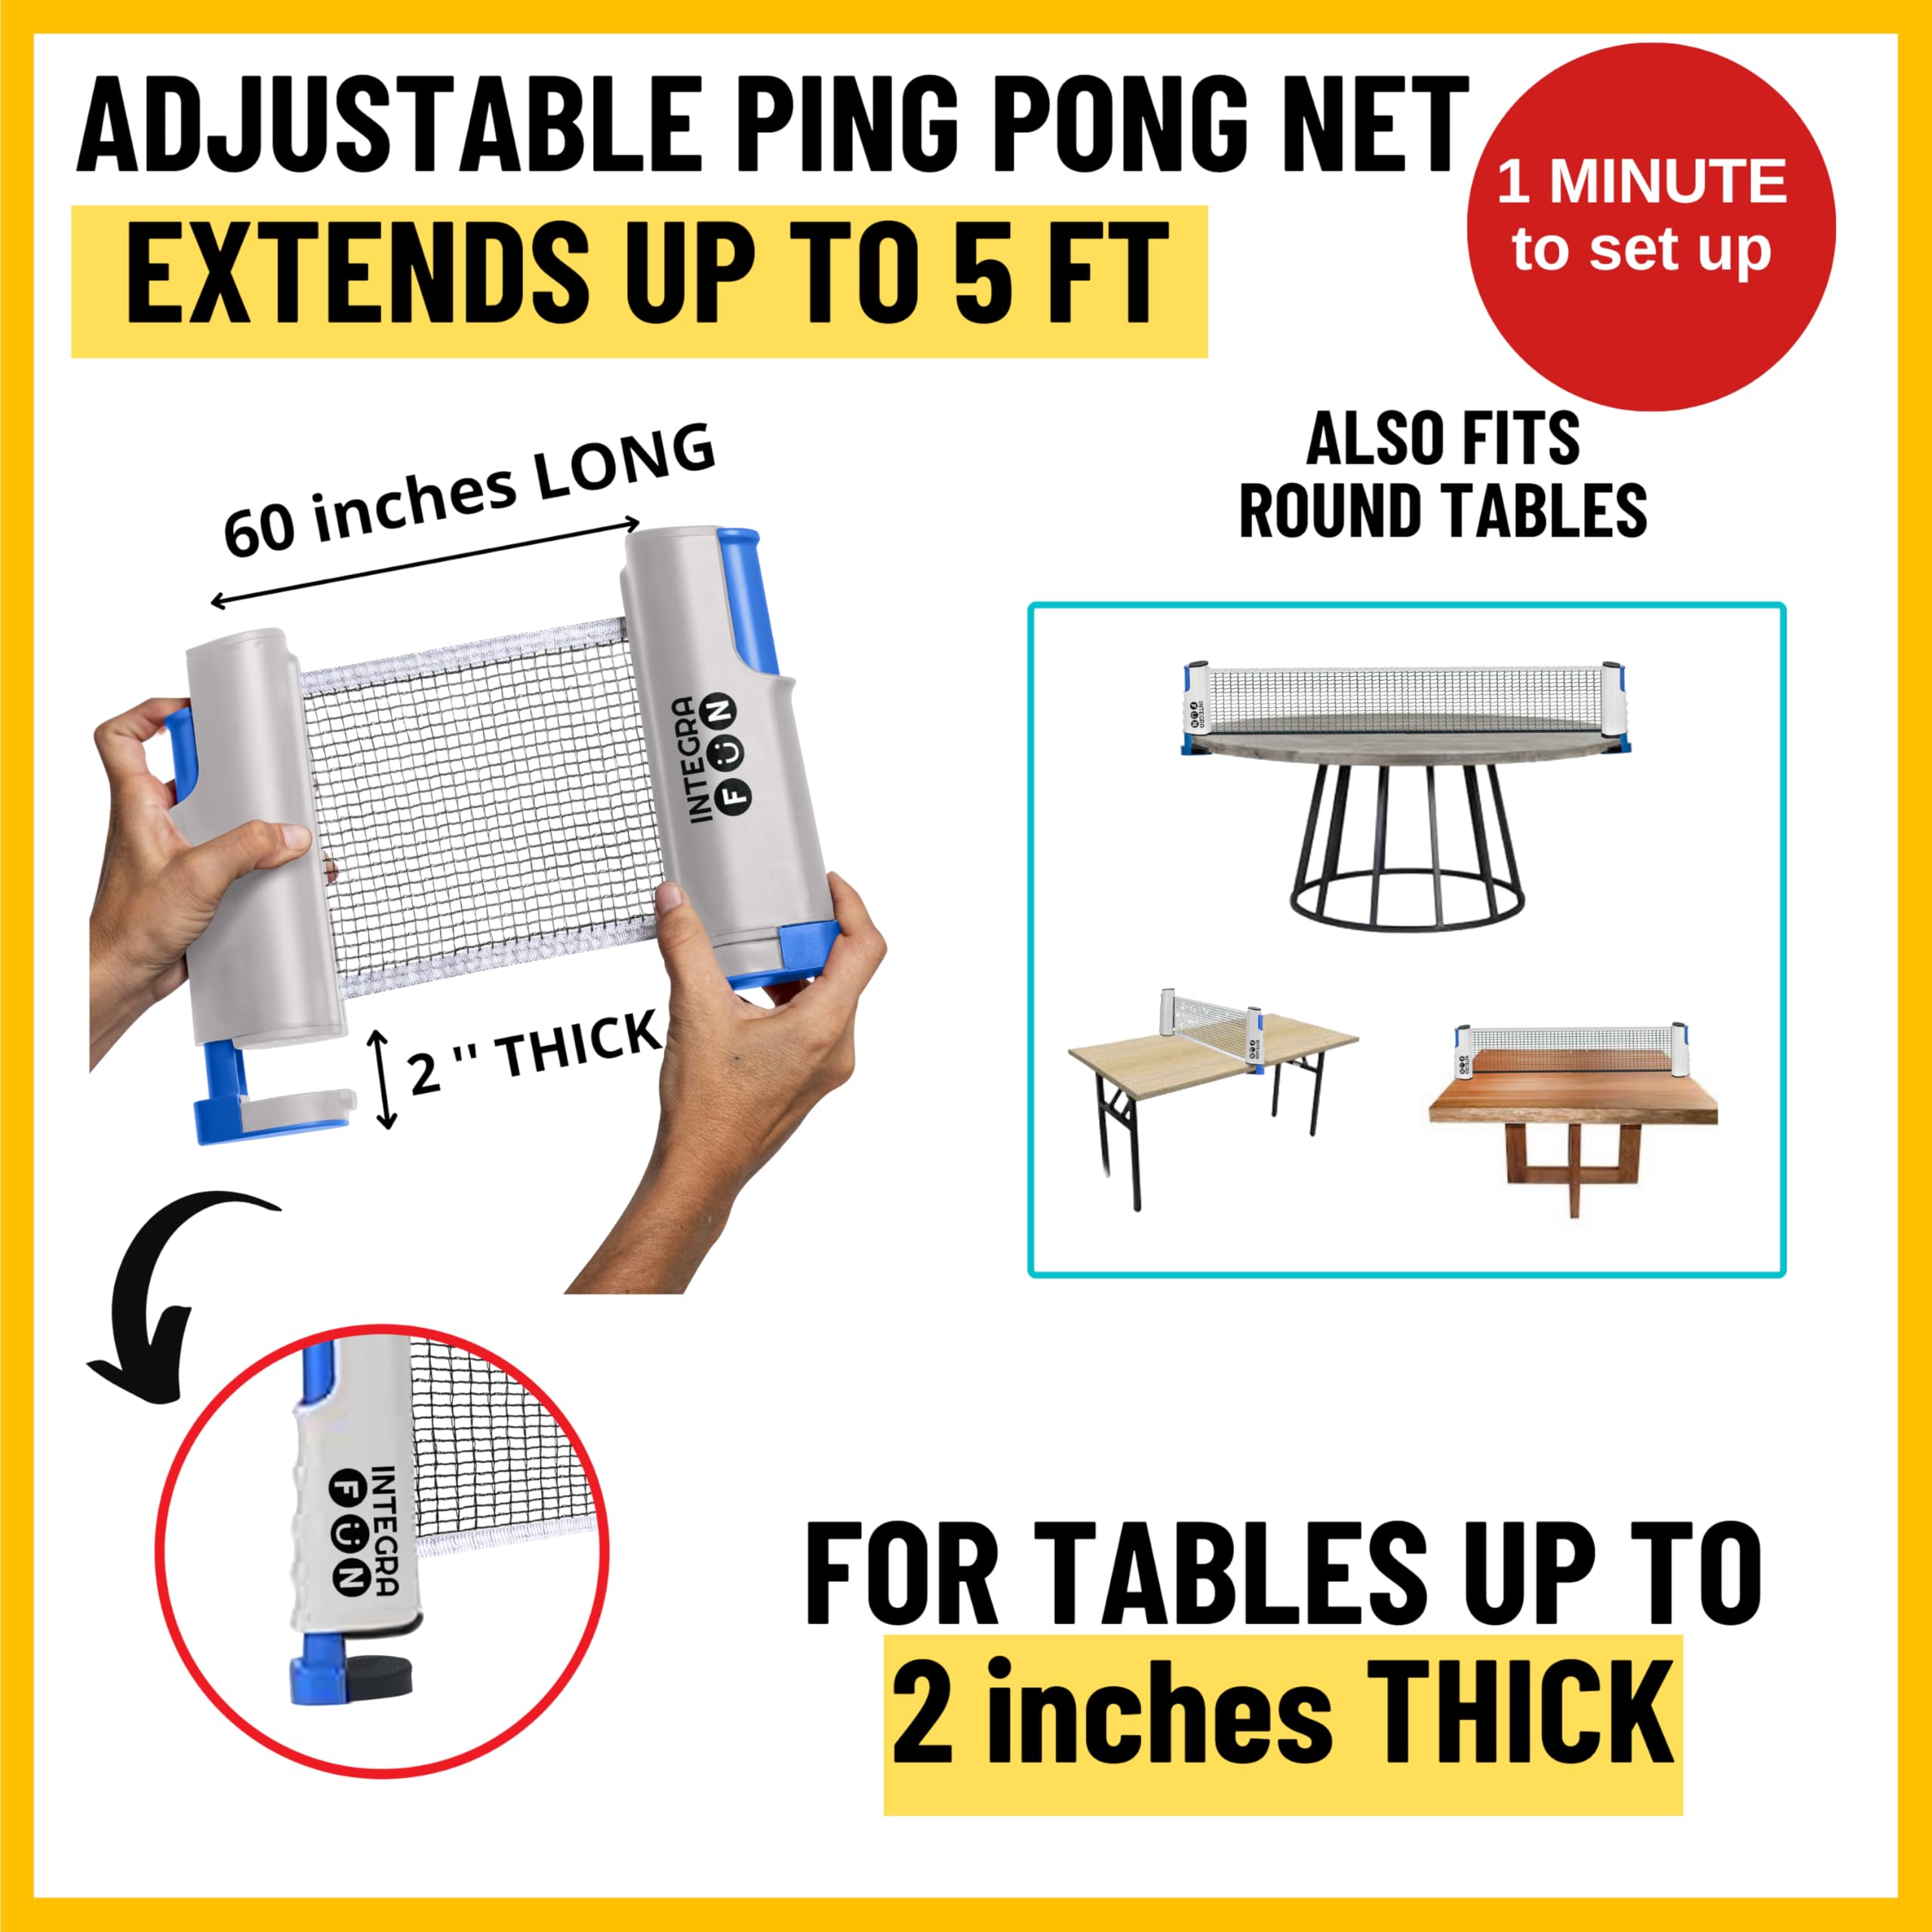 IntegraFun Pro Ping Pong Paddle Set with Ping Pong Net- Bracket Clamps,3-star Ping Pong Balls, Storage Case - Retractable Net and Post Set Adjustable to any Table - Indoor Outdoor Games for Family